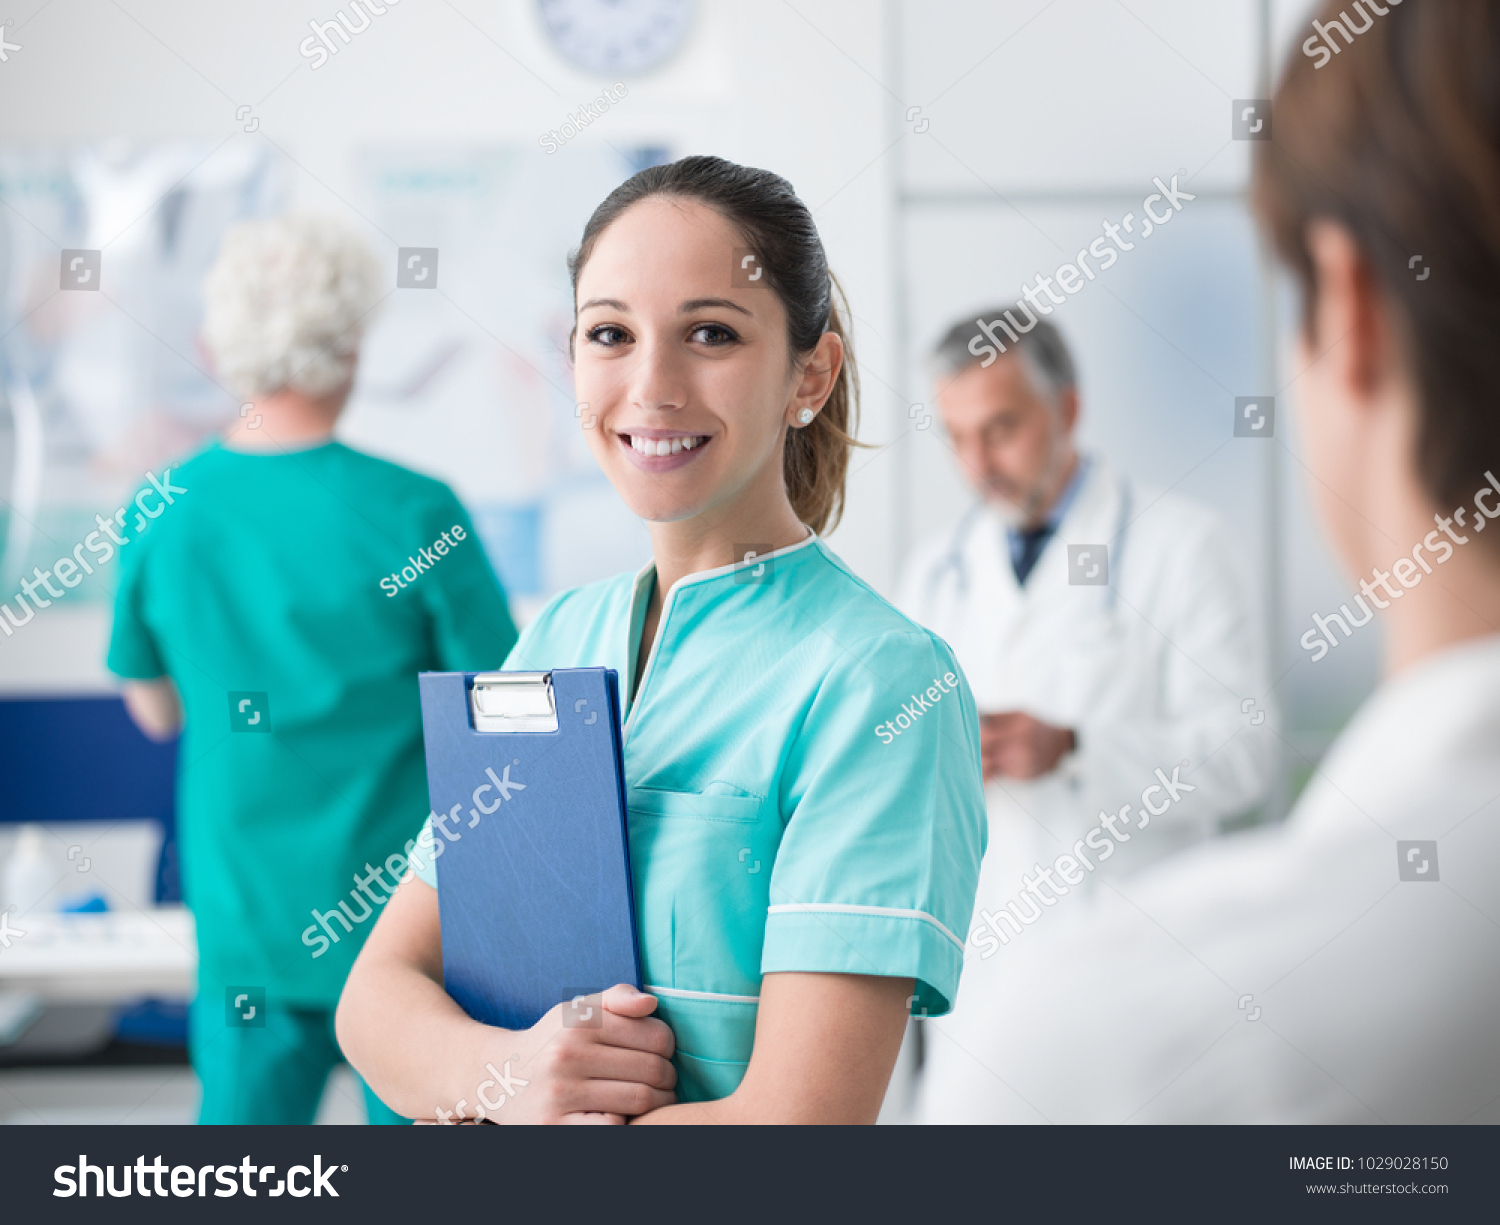 Young female medical student working at the hospital and medical staff, she is holding medical records #1029028150